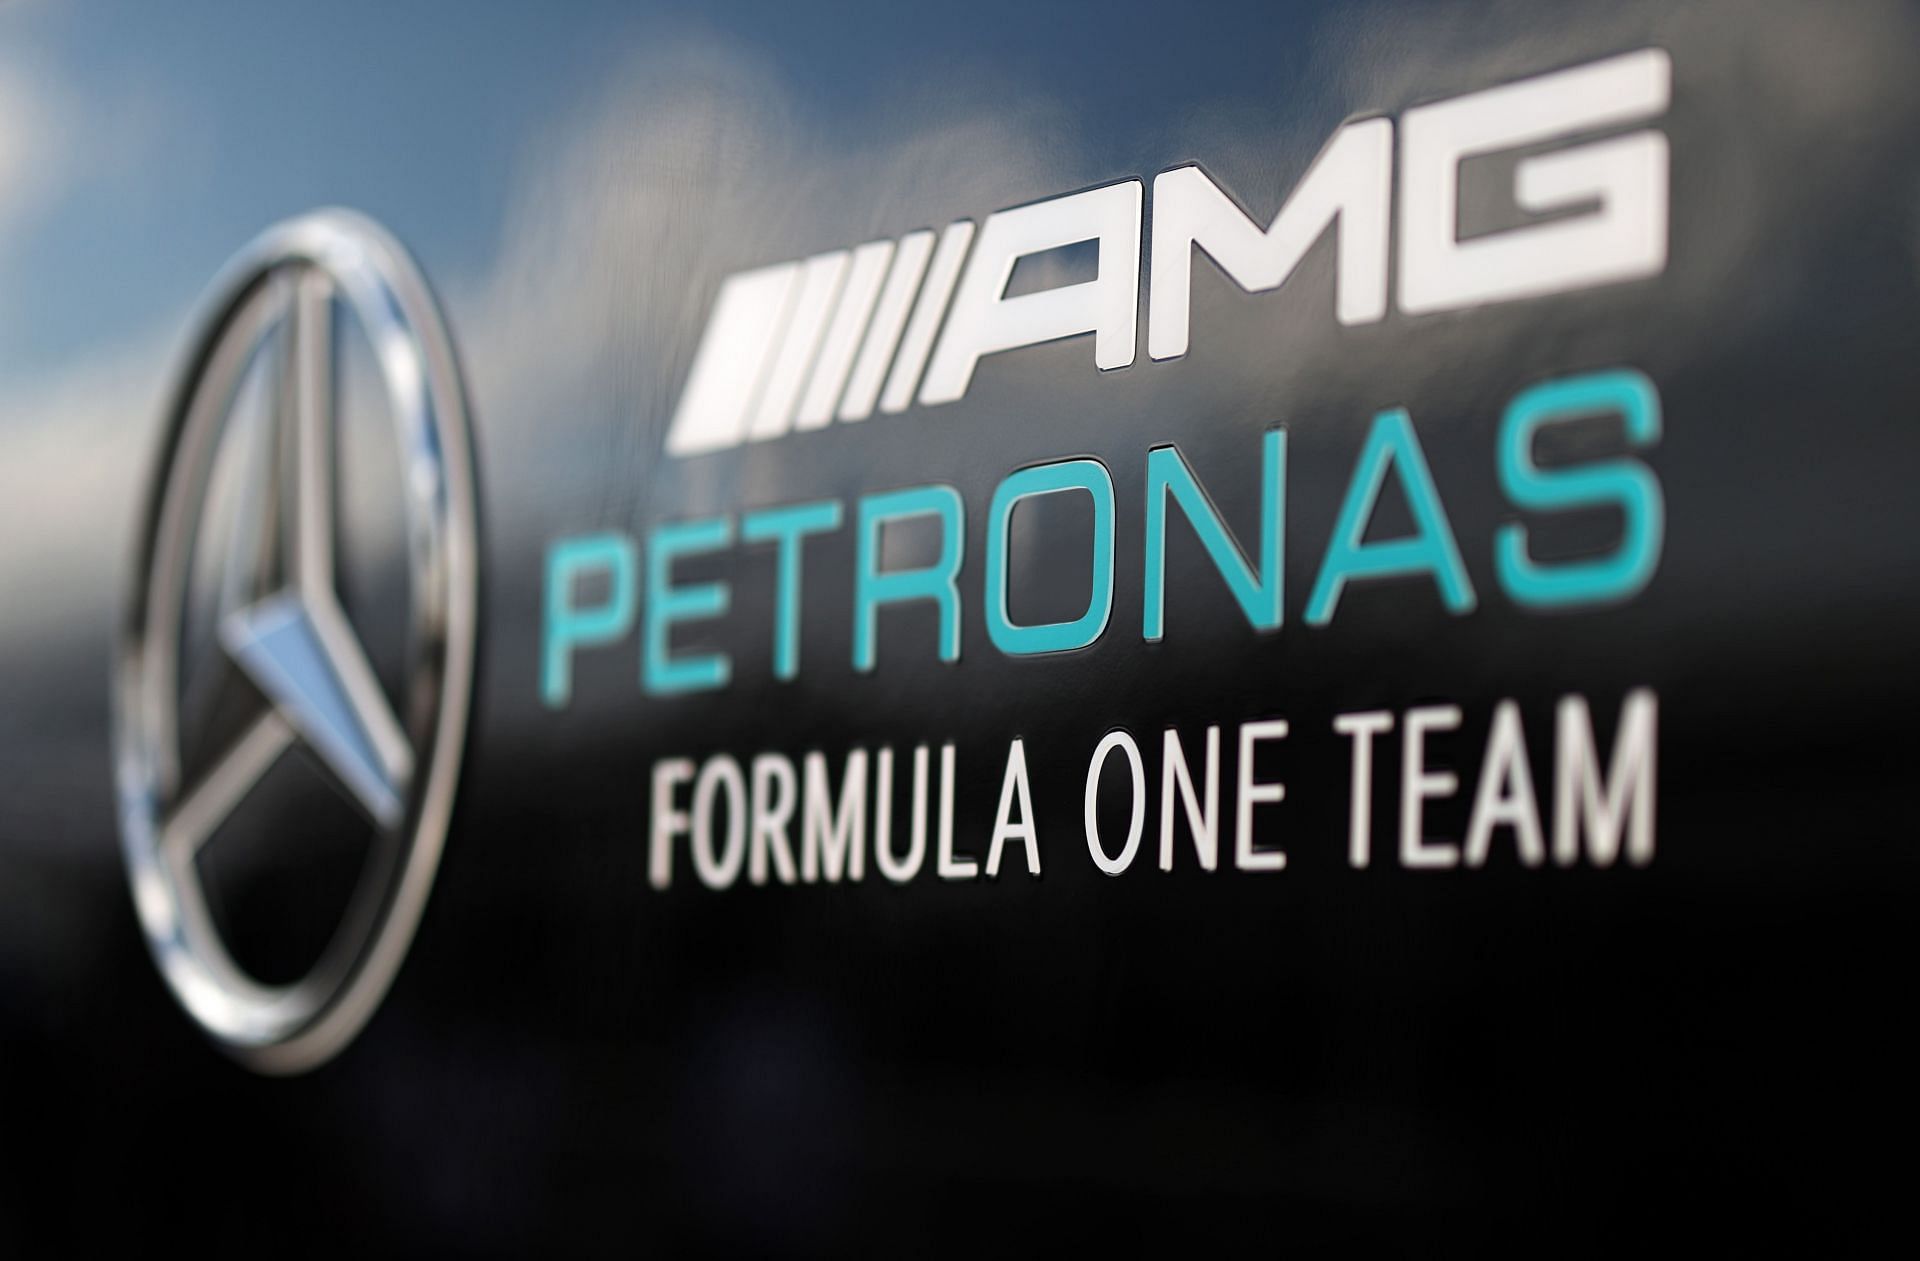 The Mercedes team logo in the F1 Paddock (Photo by Chris Graythen/Getty Images)